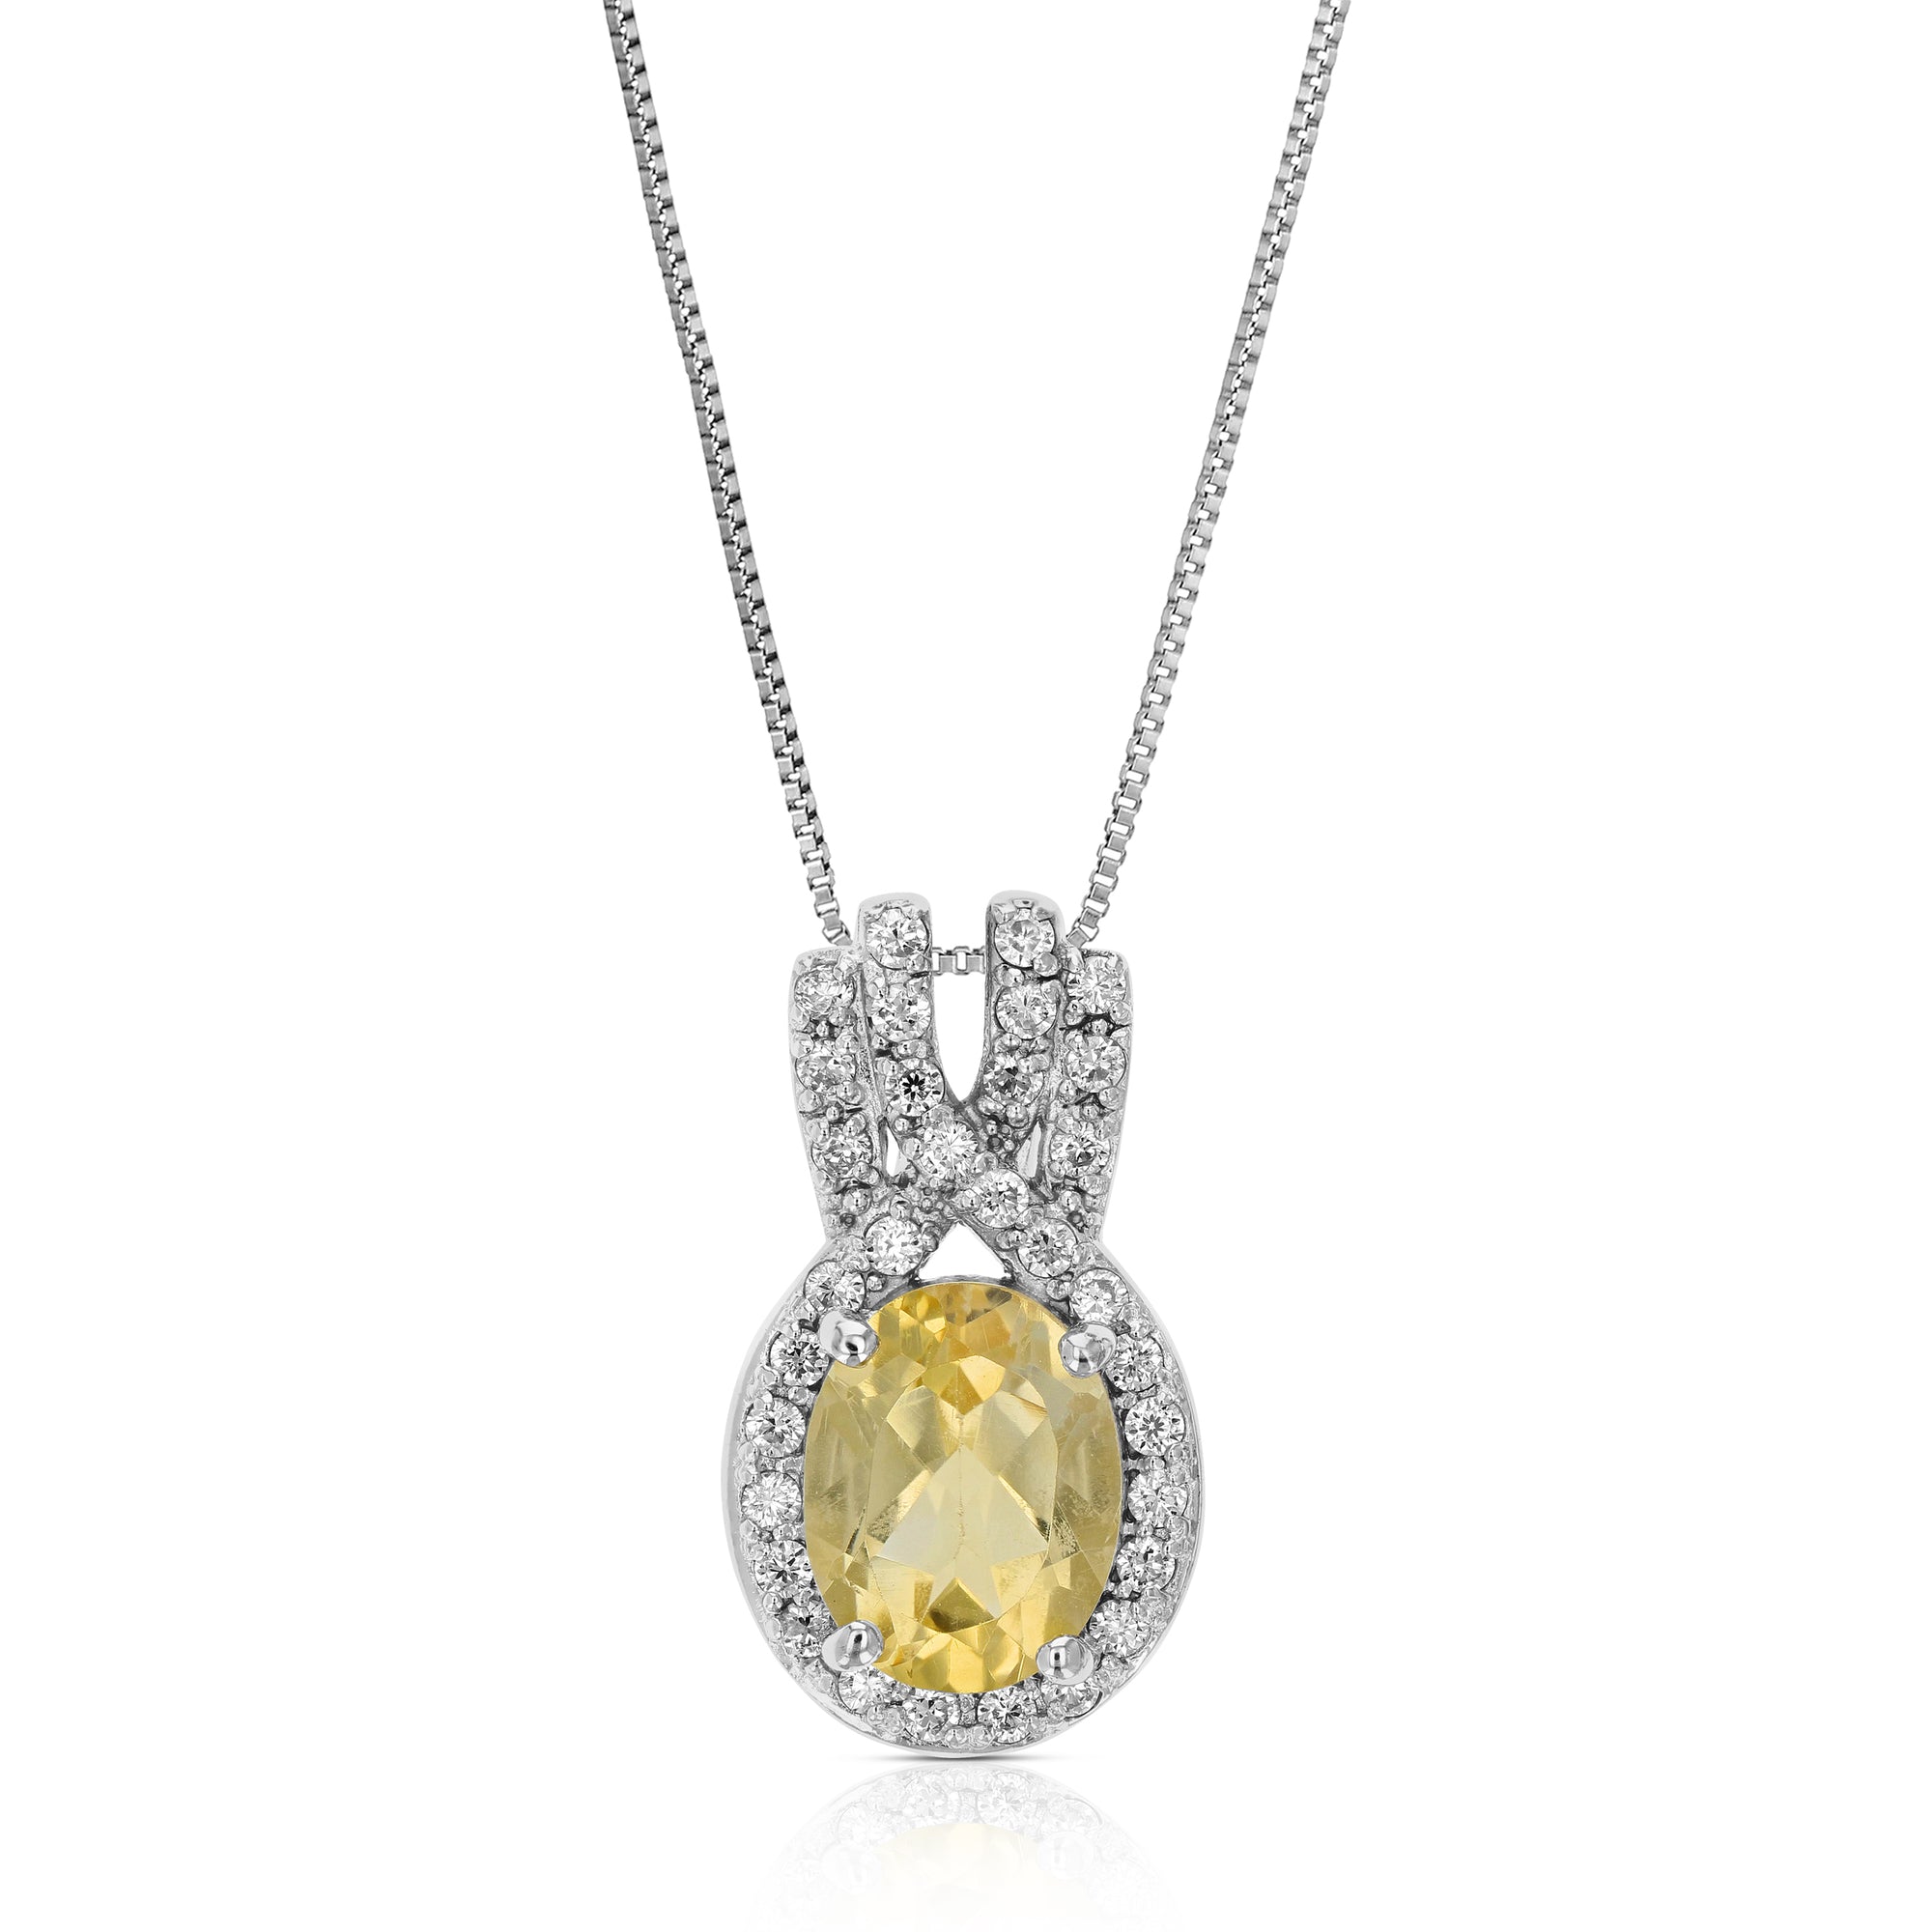 1.20 cttw Pendant Necklace, Citrine Oval Shape Pendant Necklace for Women in .925 Sterling Silver with Rhodium, 18 Inch Chain, Prong Setting